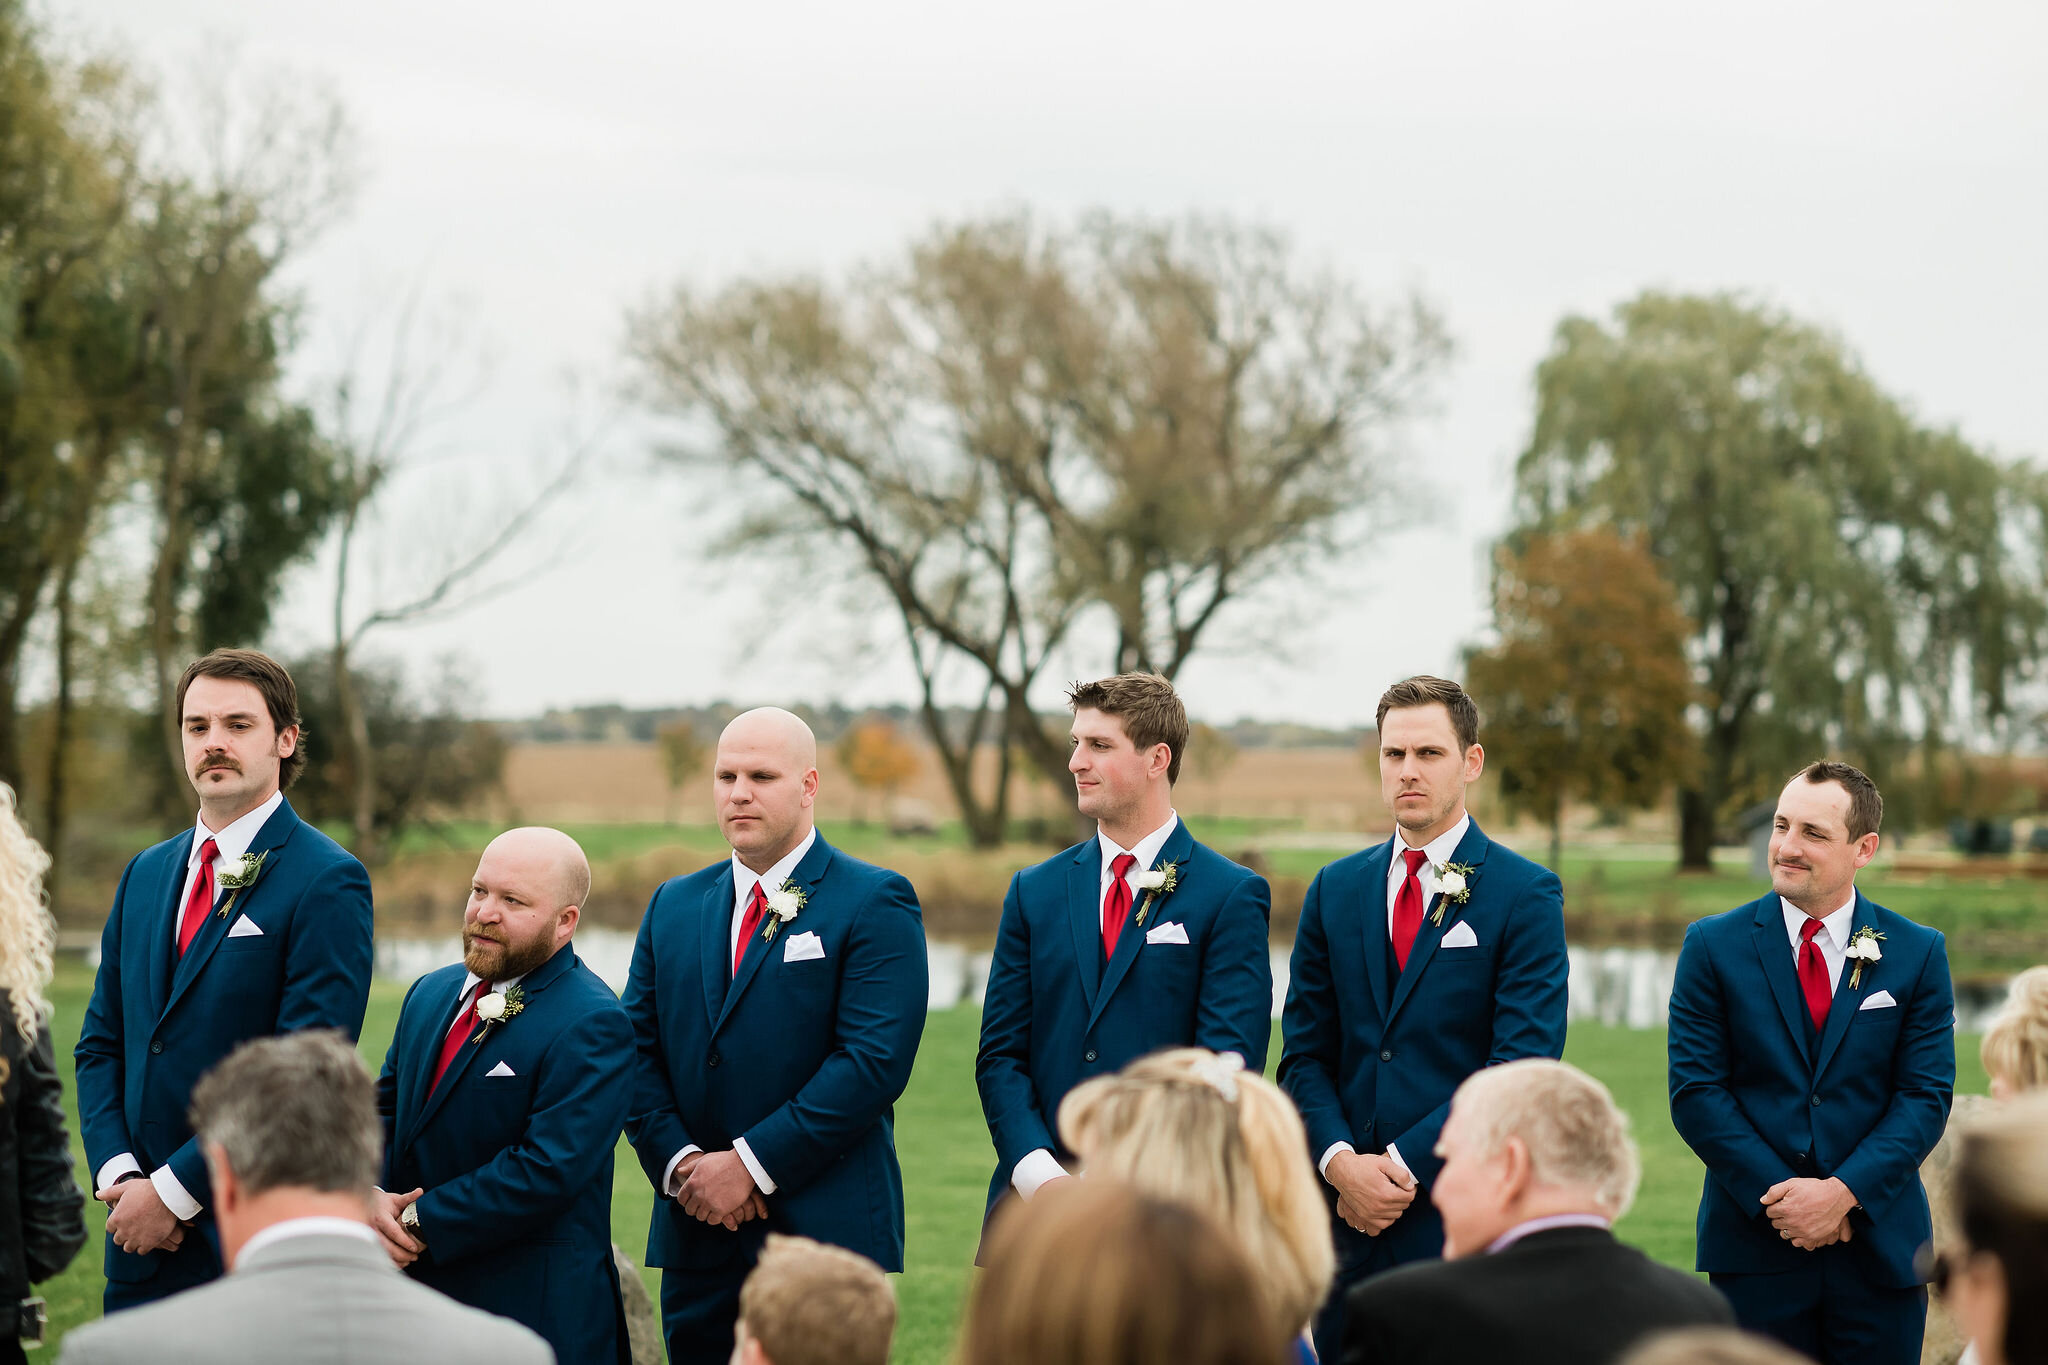 Groomsmen at the alter